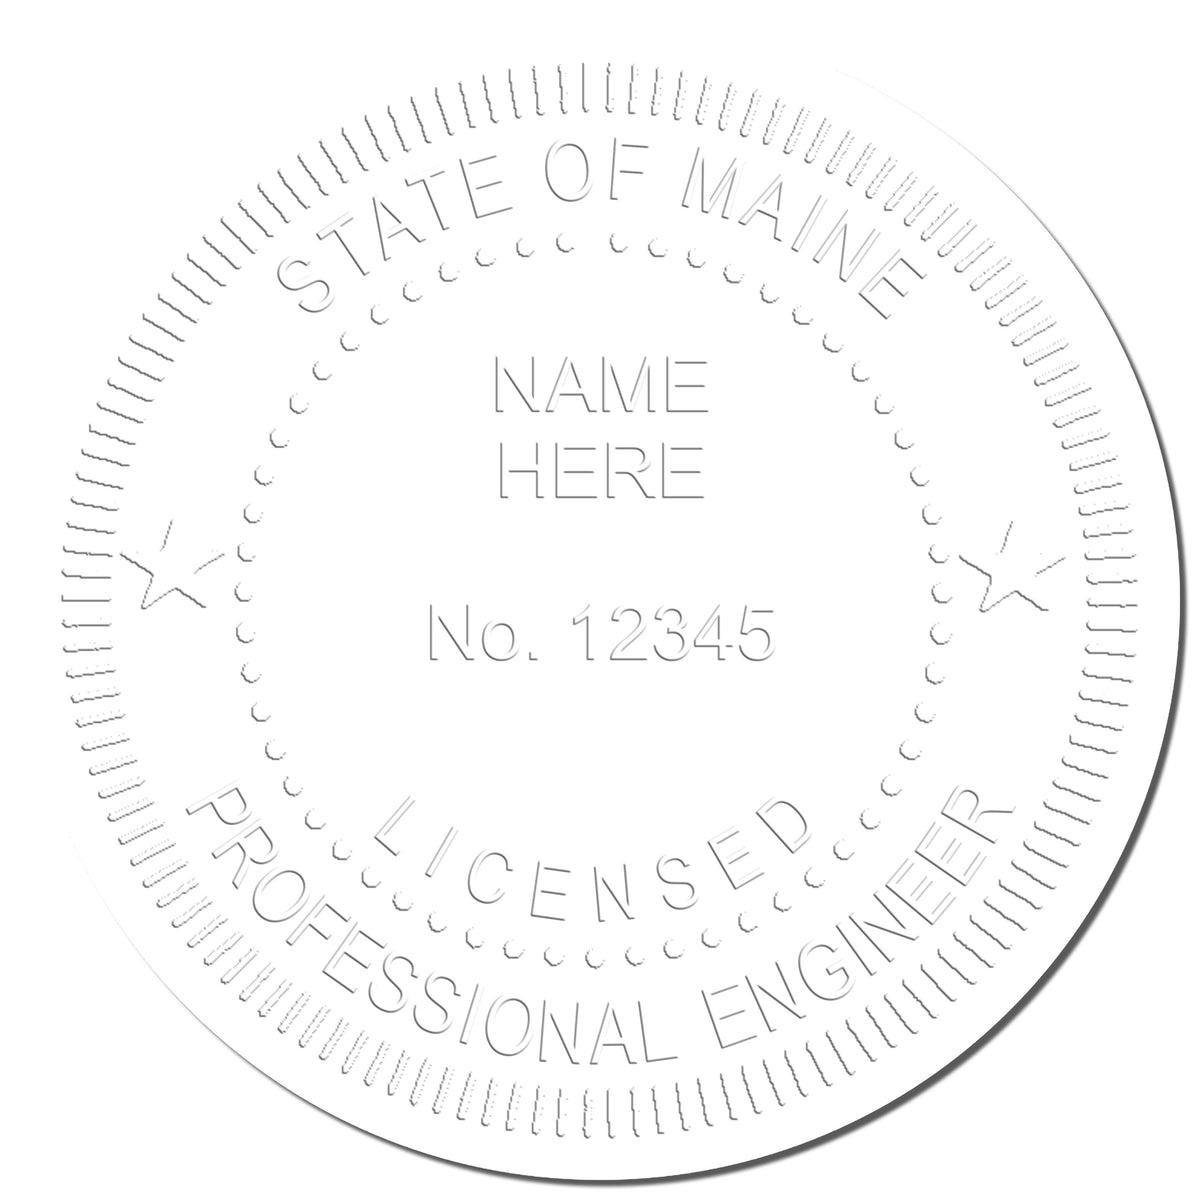 This paper is stamped with a sample imprint of the Gift Maine Engineer Seal, signifying its quality and reliability.